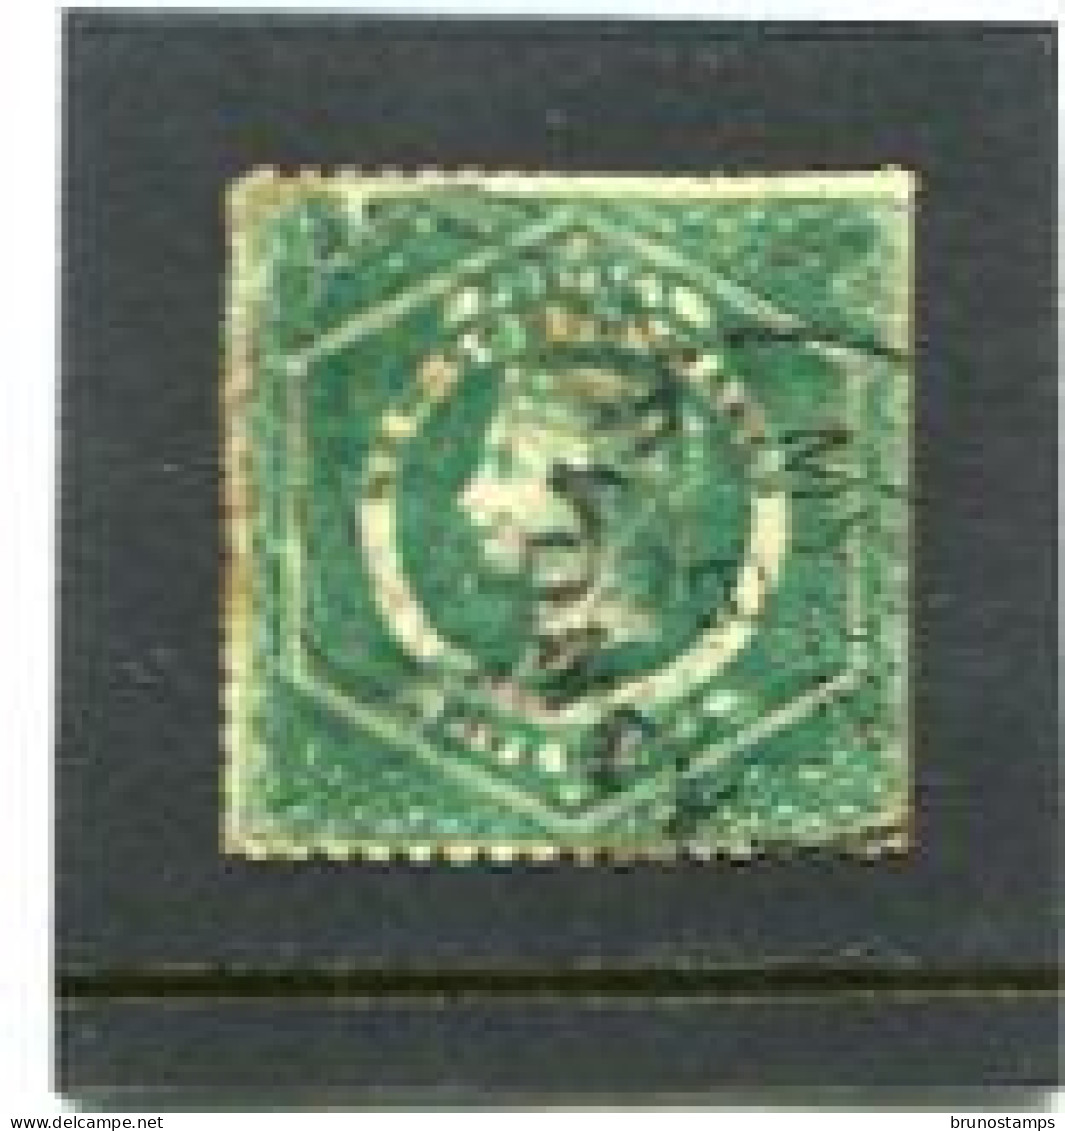 AUSTRALIA/NEW SOUTH WALES - 1863  5d  GREEN  SPACEFILLER  FINE USED  SG 160 - Usati